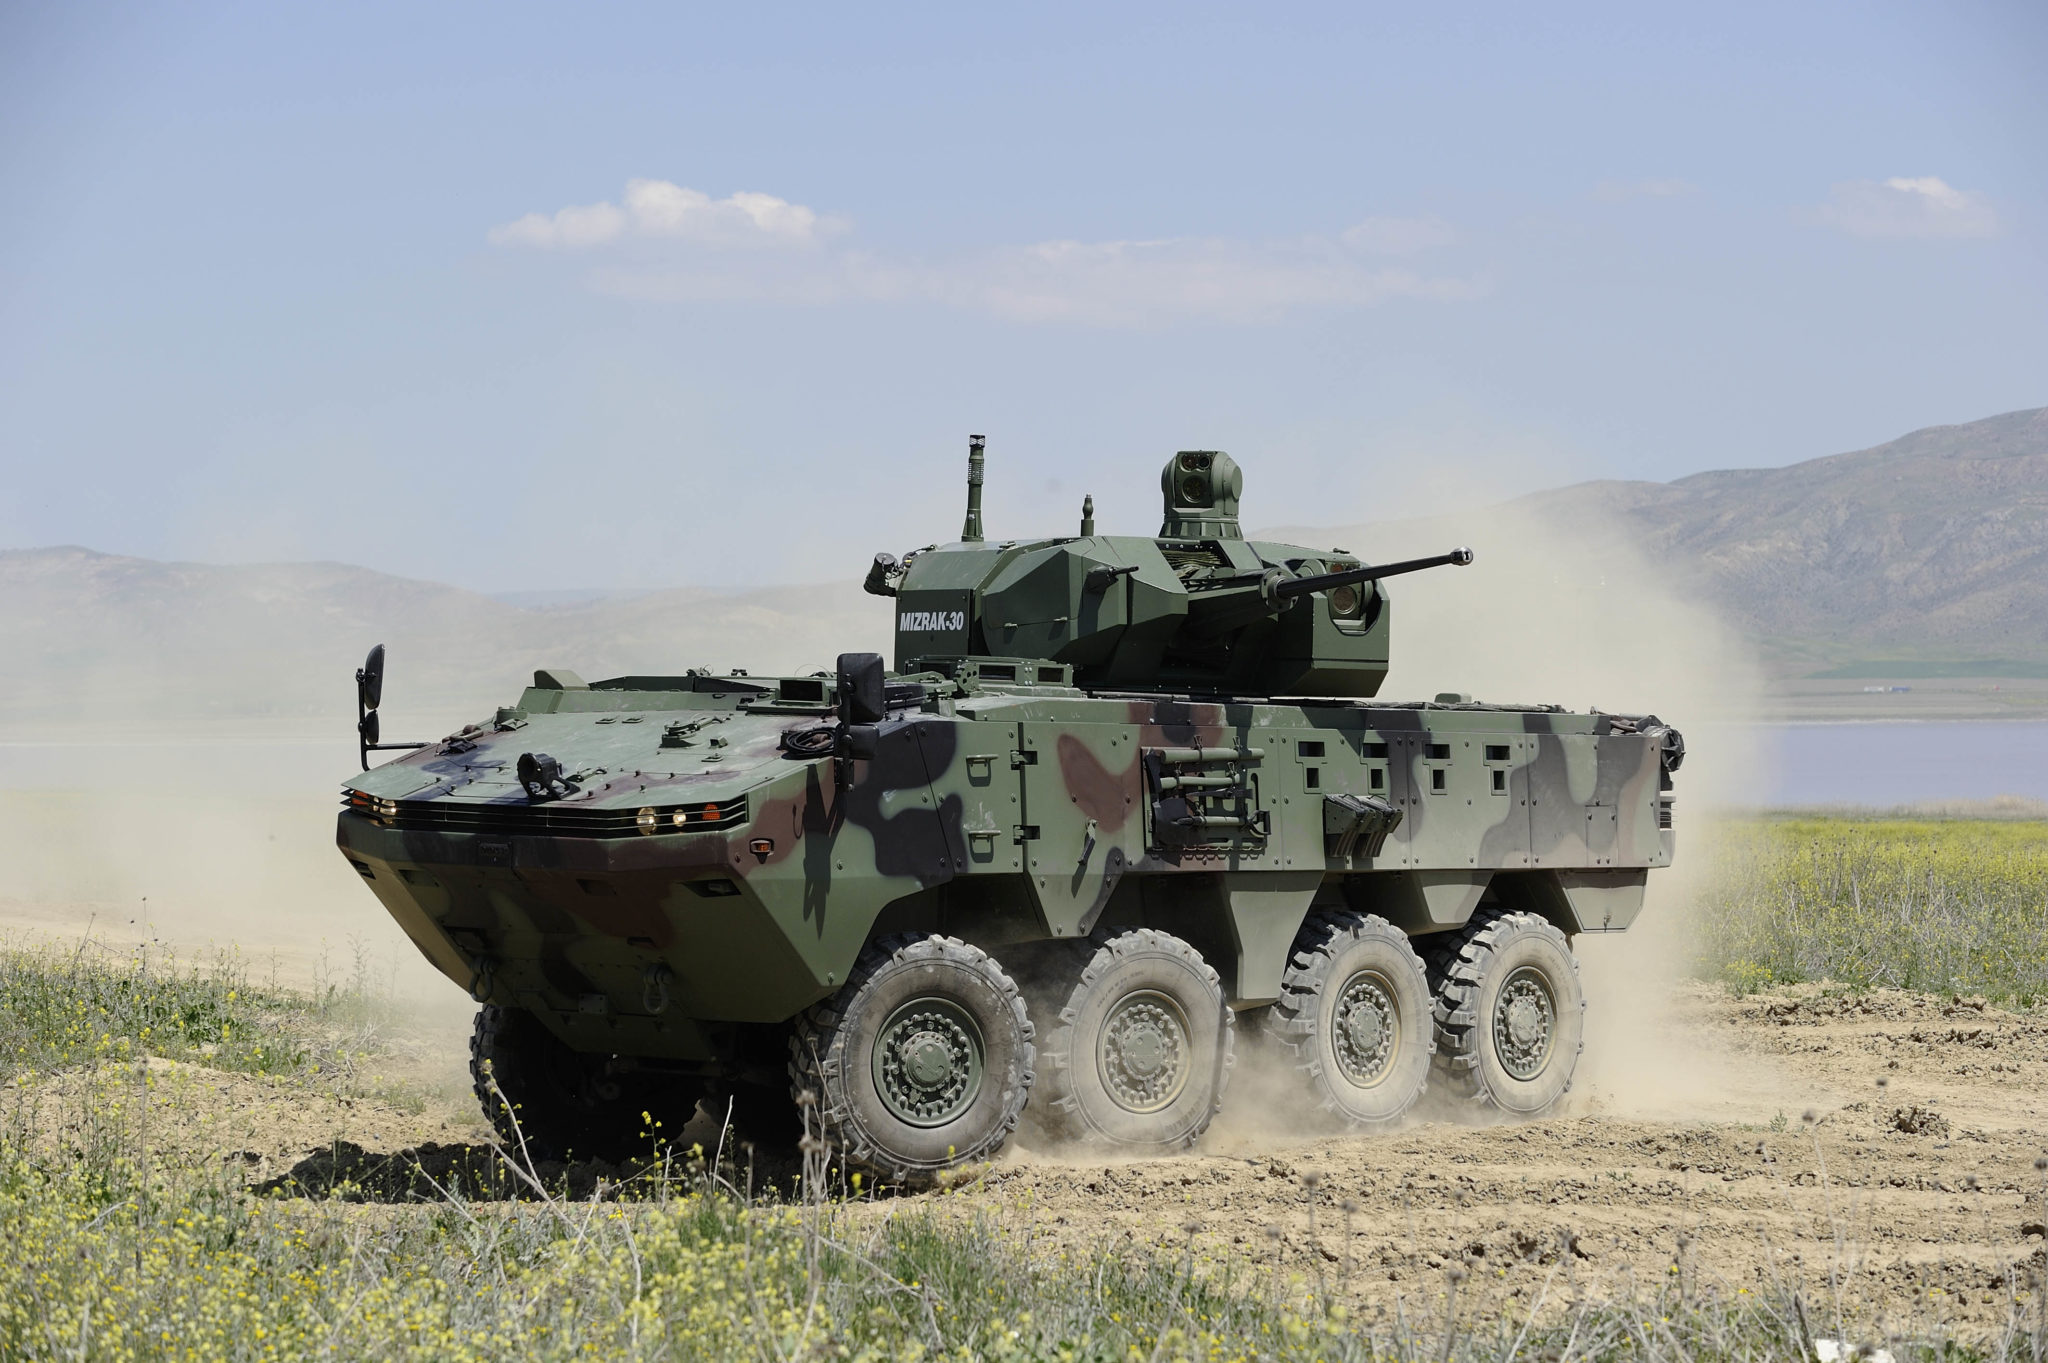 Otokar introduces its Electric Armored Vehicle “AKREP IIe” at IDEX